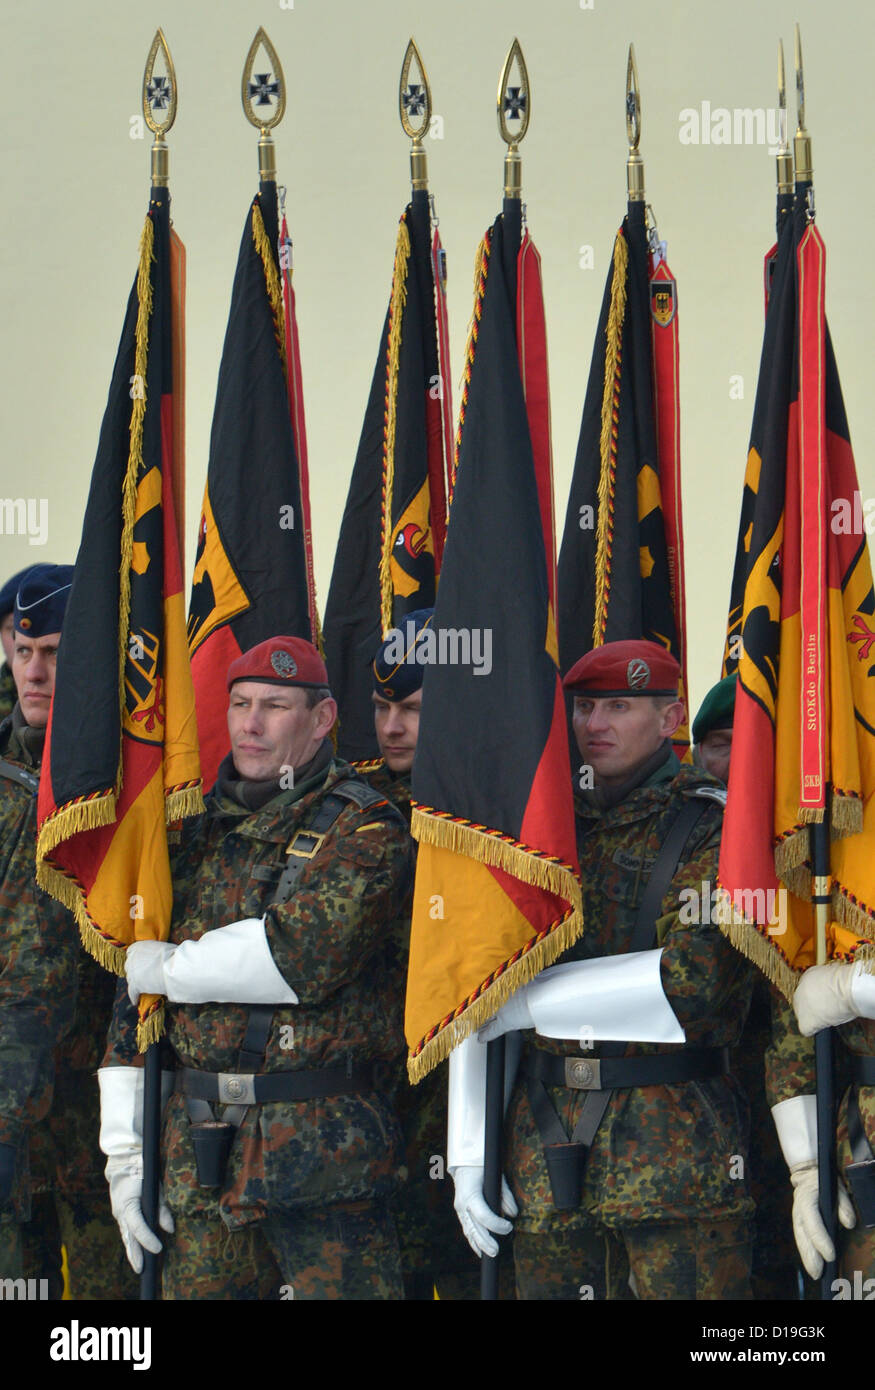 Flag carrying German Armed Forces soldiers report for a fairwell muster in Erfurt, Germany, 11 December 2012. There was a farewell ceremony for the Military Subdistrict Comand III that has been stationed in Erfurt for approximately eleven years. It will be disbanded by the end of March 2013. Photo: Martin Schutt Stock Photo